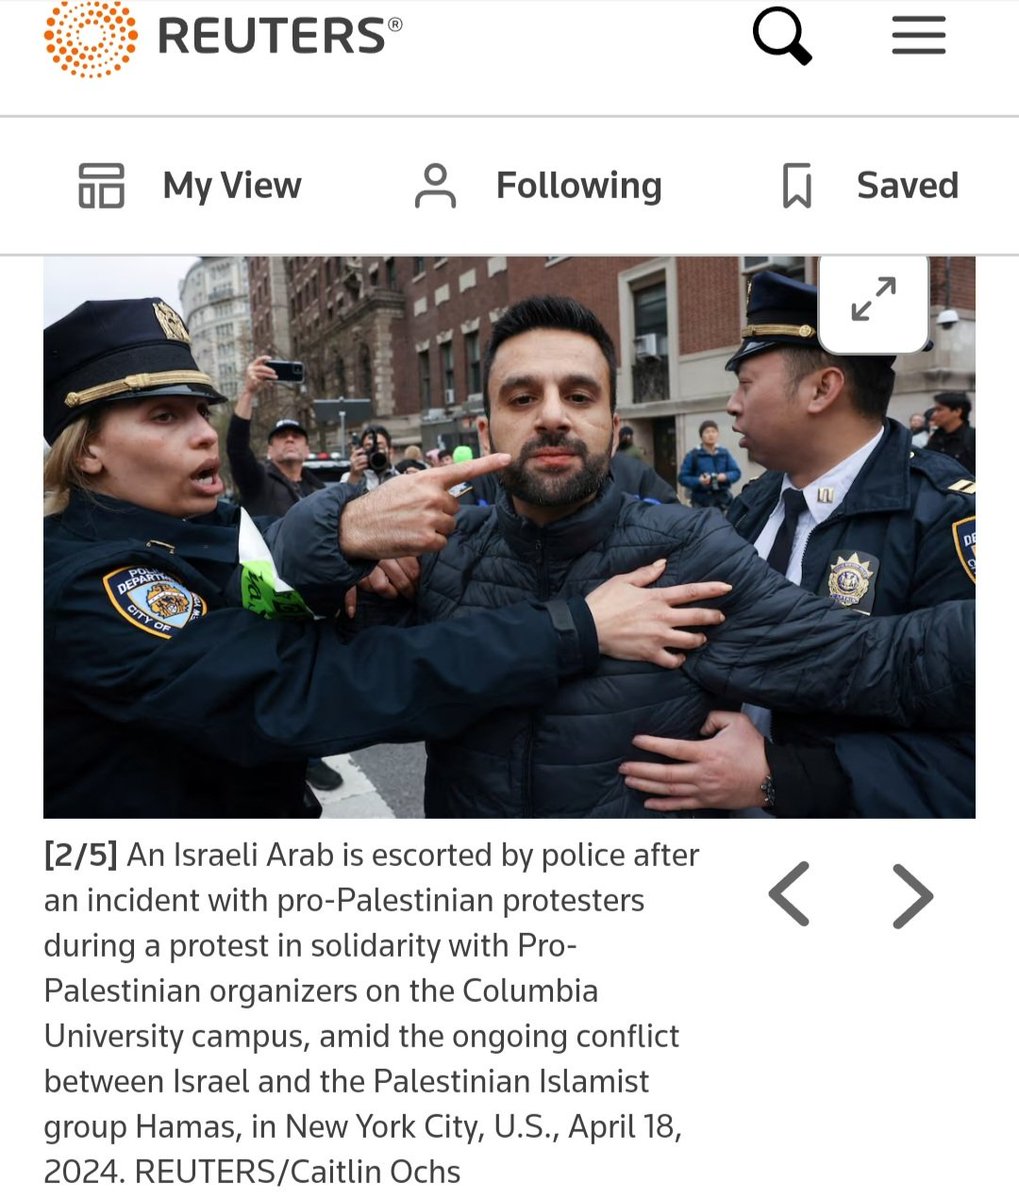 I saw that @Reuters corrected their false caption which claimed I was arrested by the police in New York, but they still aren’t presenting the full truth - they wrote that I was escorted by police after an incident with pro-Palestinian demonstrators, but it wasn’t just an